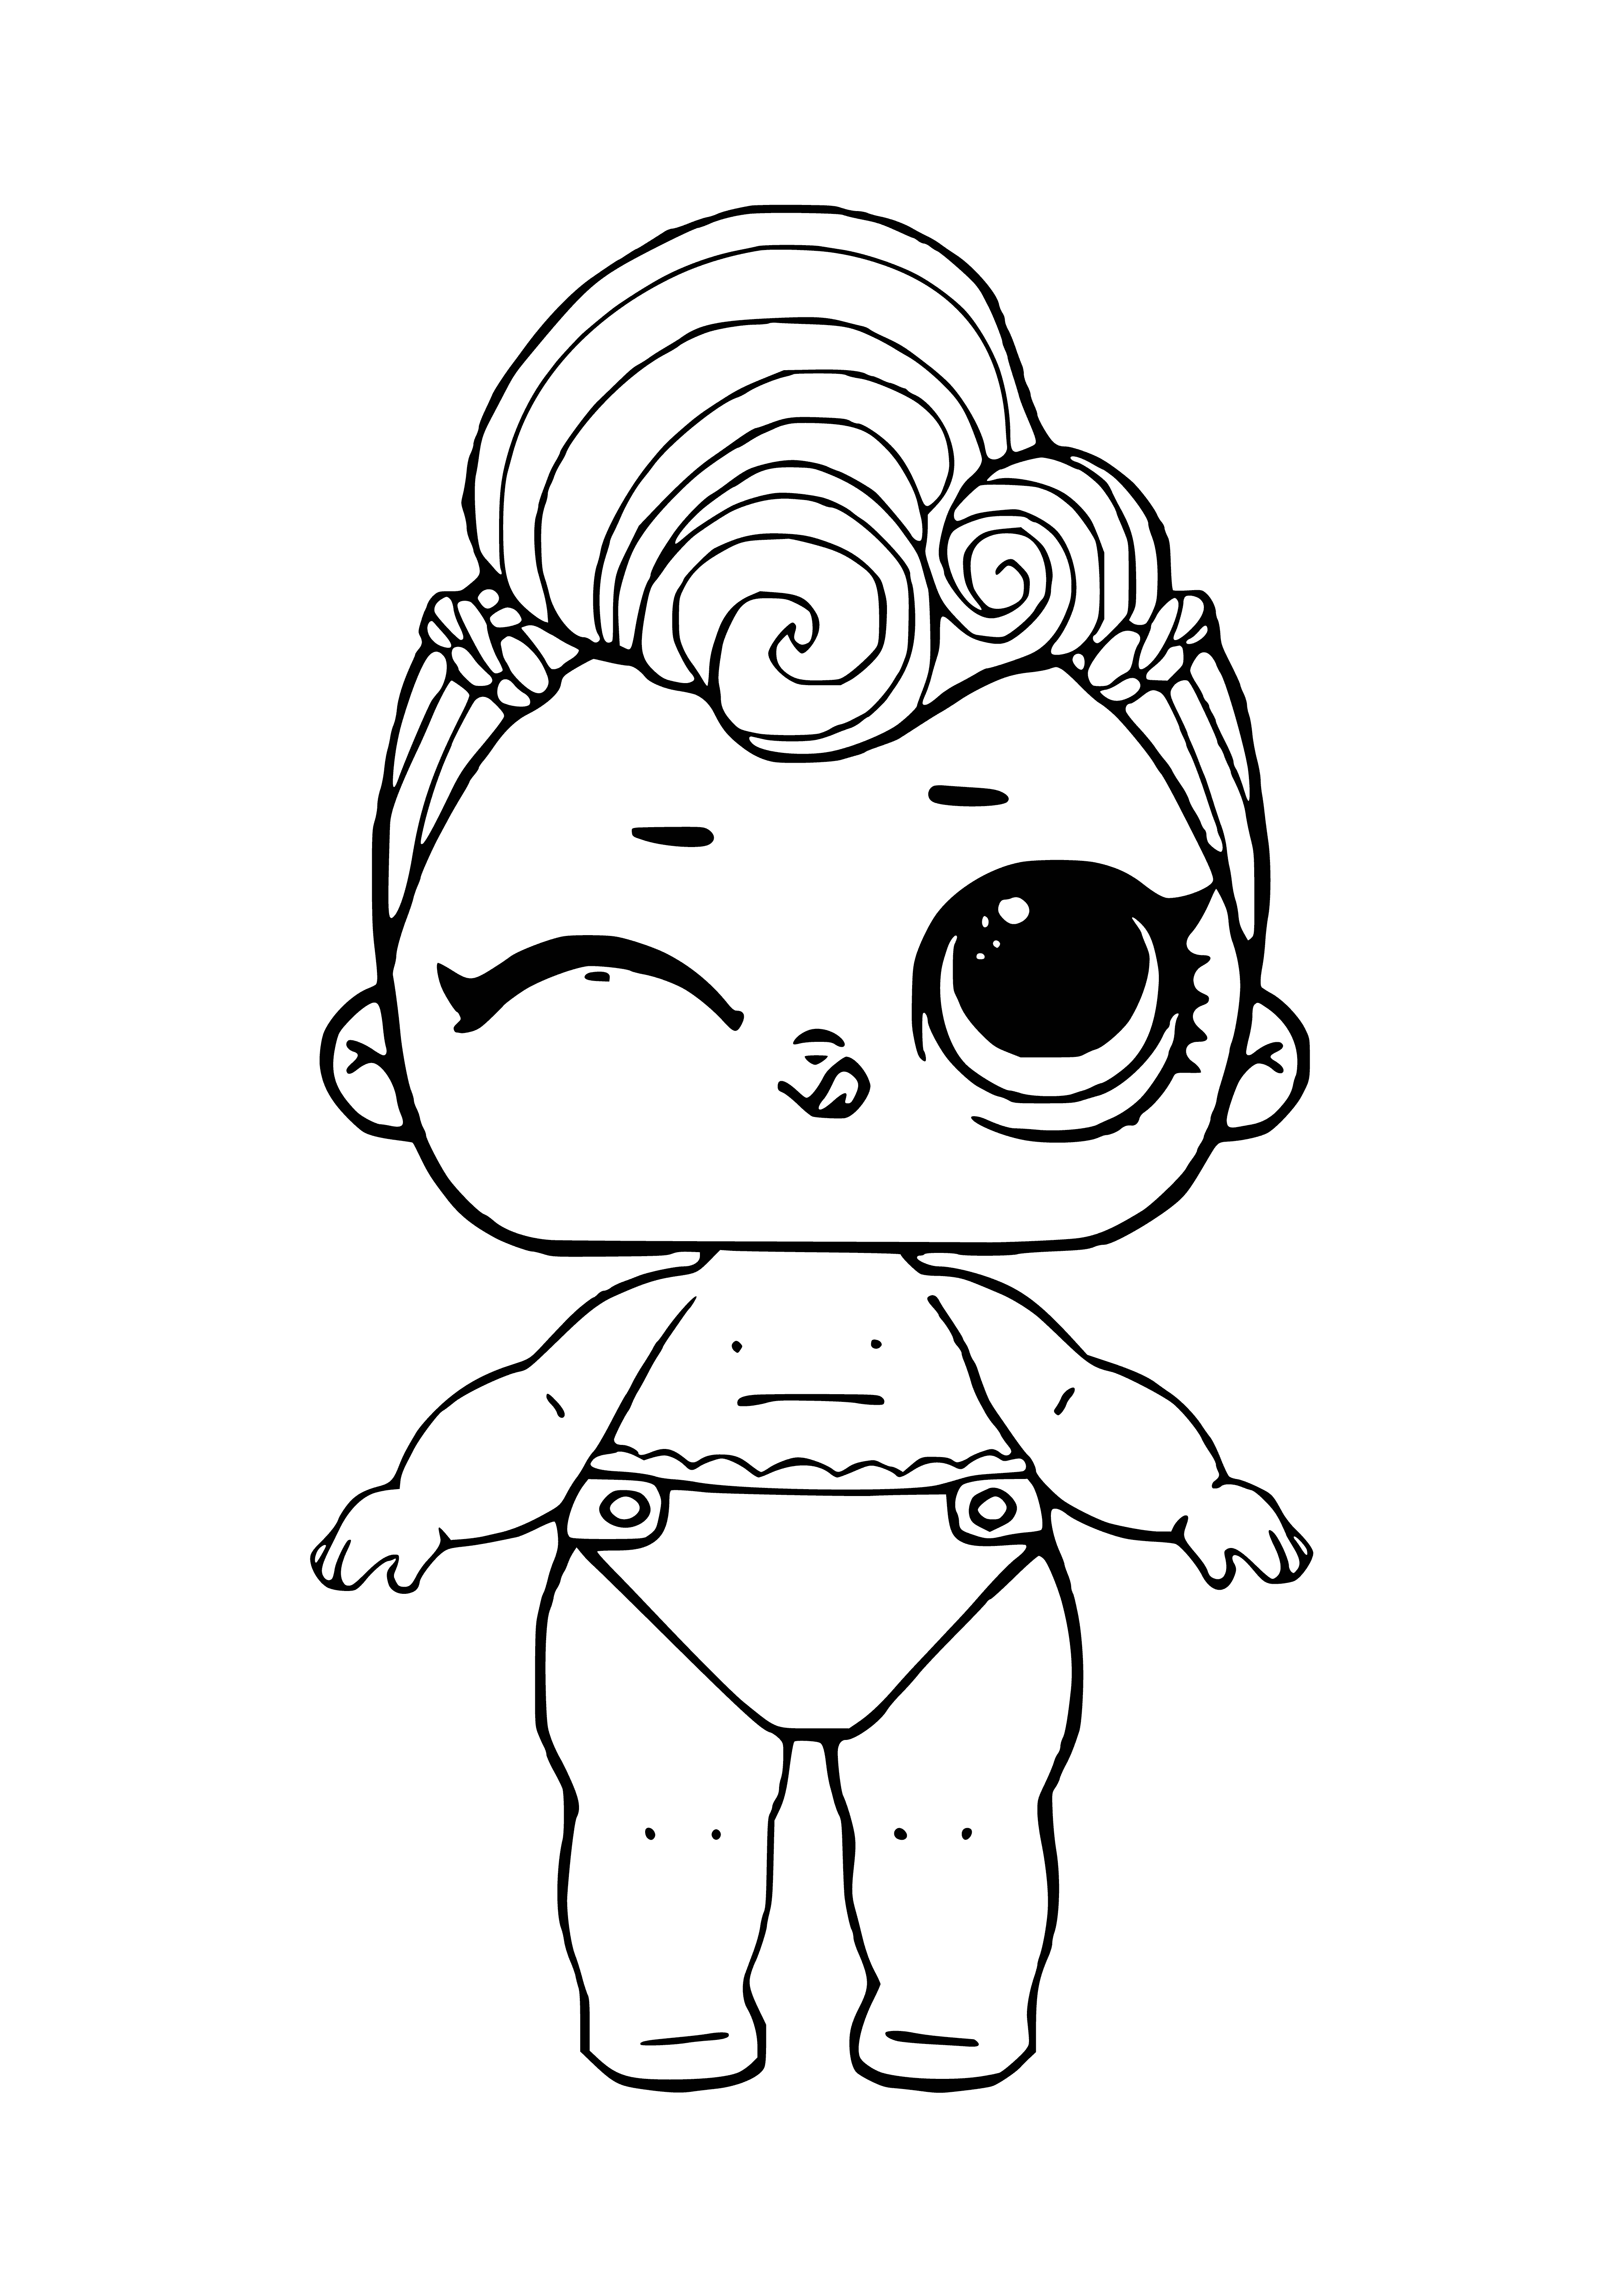 coloring page: Toy L.O.L. "Lil Stardust" is star-shaped, glittered & sequined - perfect for those who love sparkles!